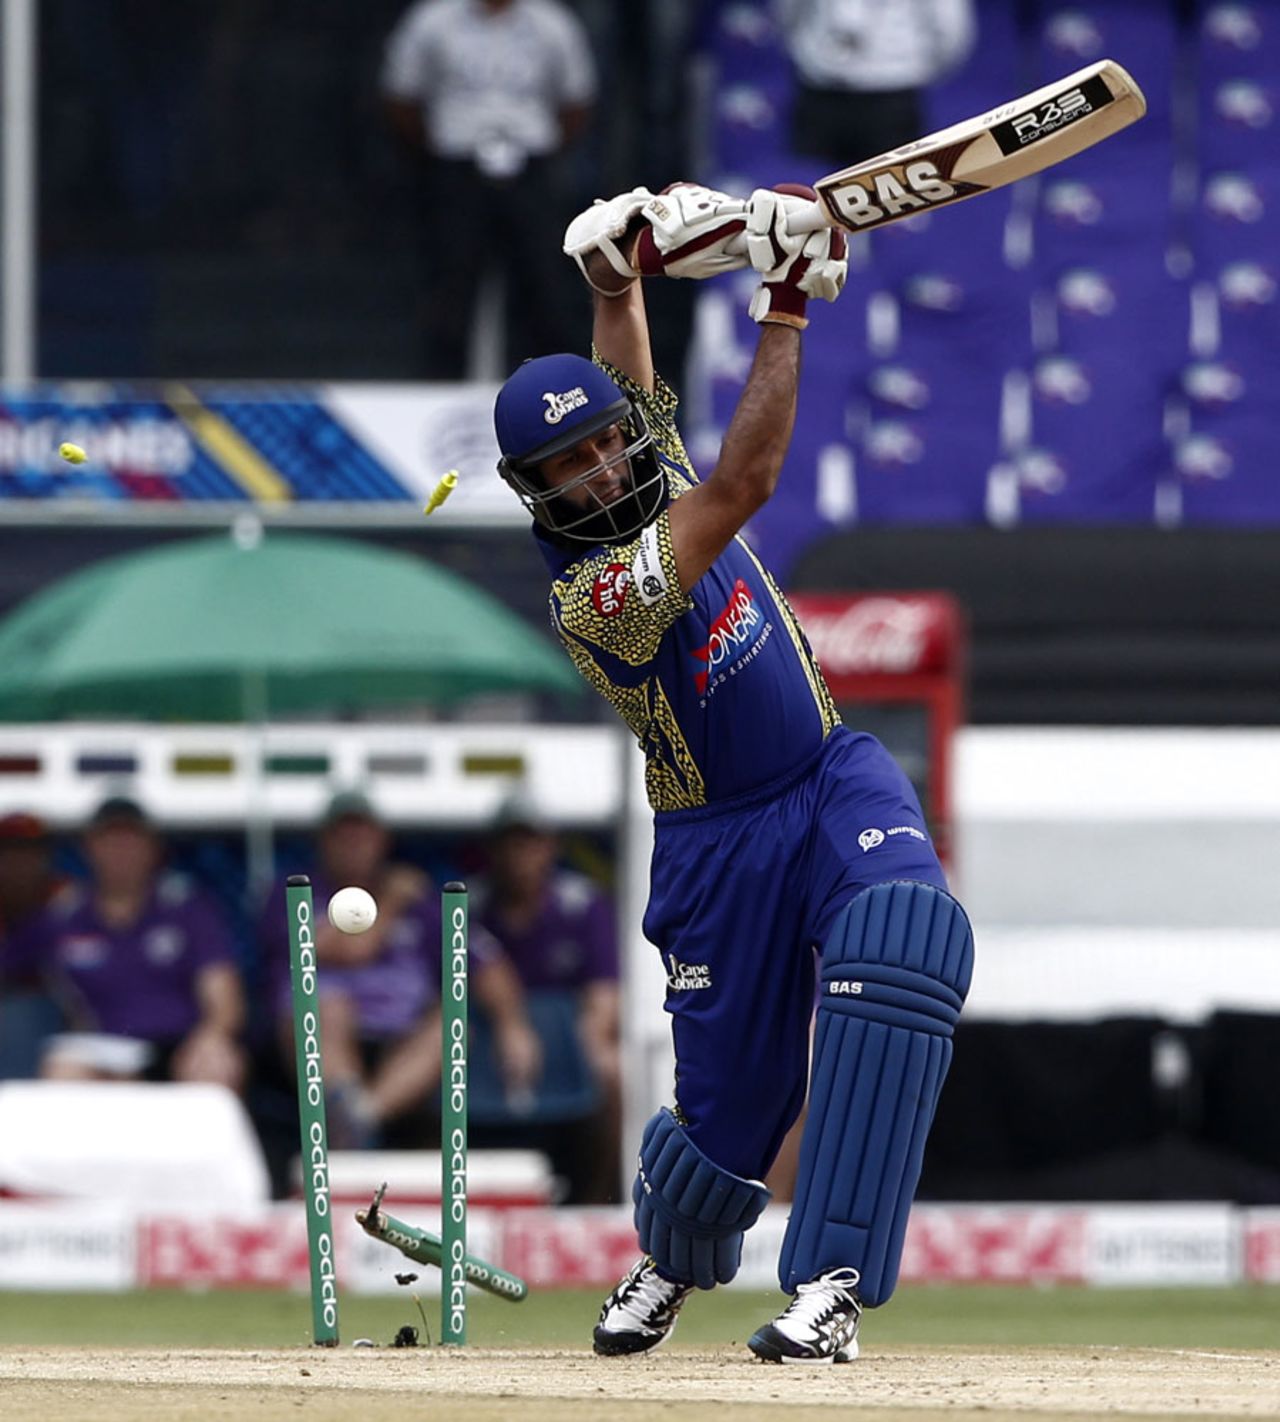 Hashim Amla was bowled for 8, Cape Cobras v Hobart Hurricanes, Champions League T20, Hyderabad, September 21, 2014